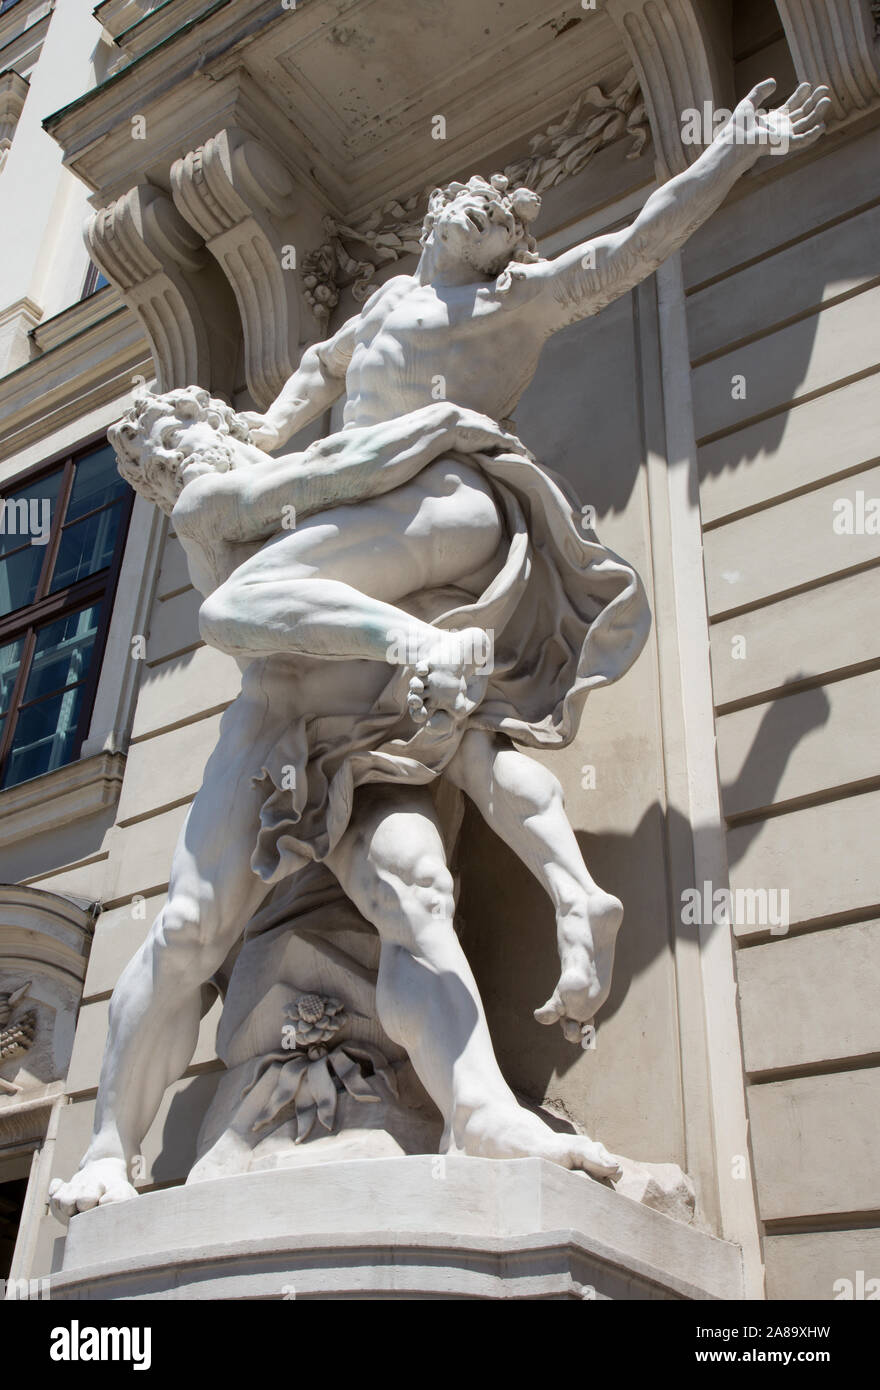 Vienna - Statue of Hercules fighting Antaeus from entry to Hofburg palaces Stock Photo